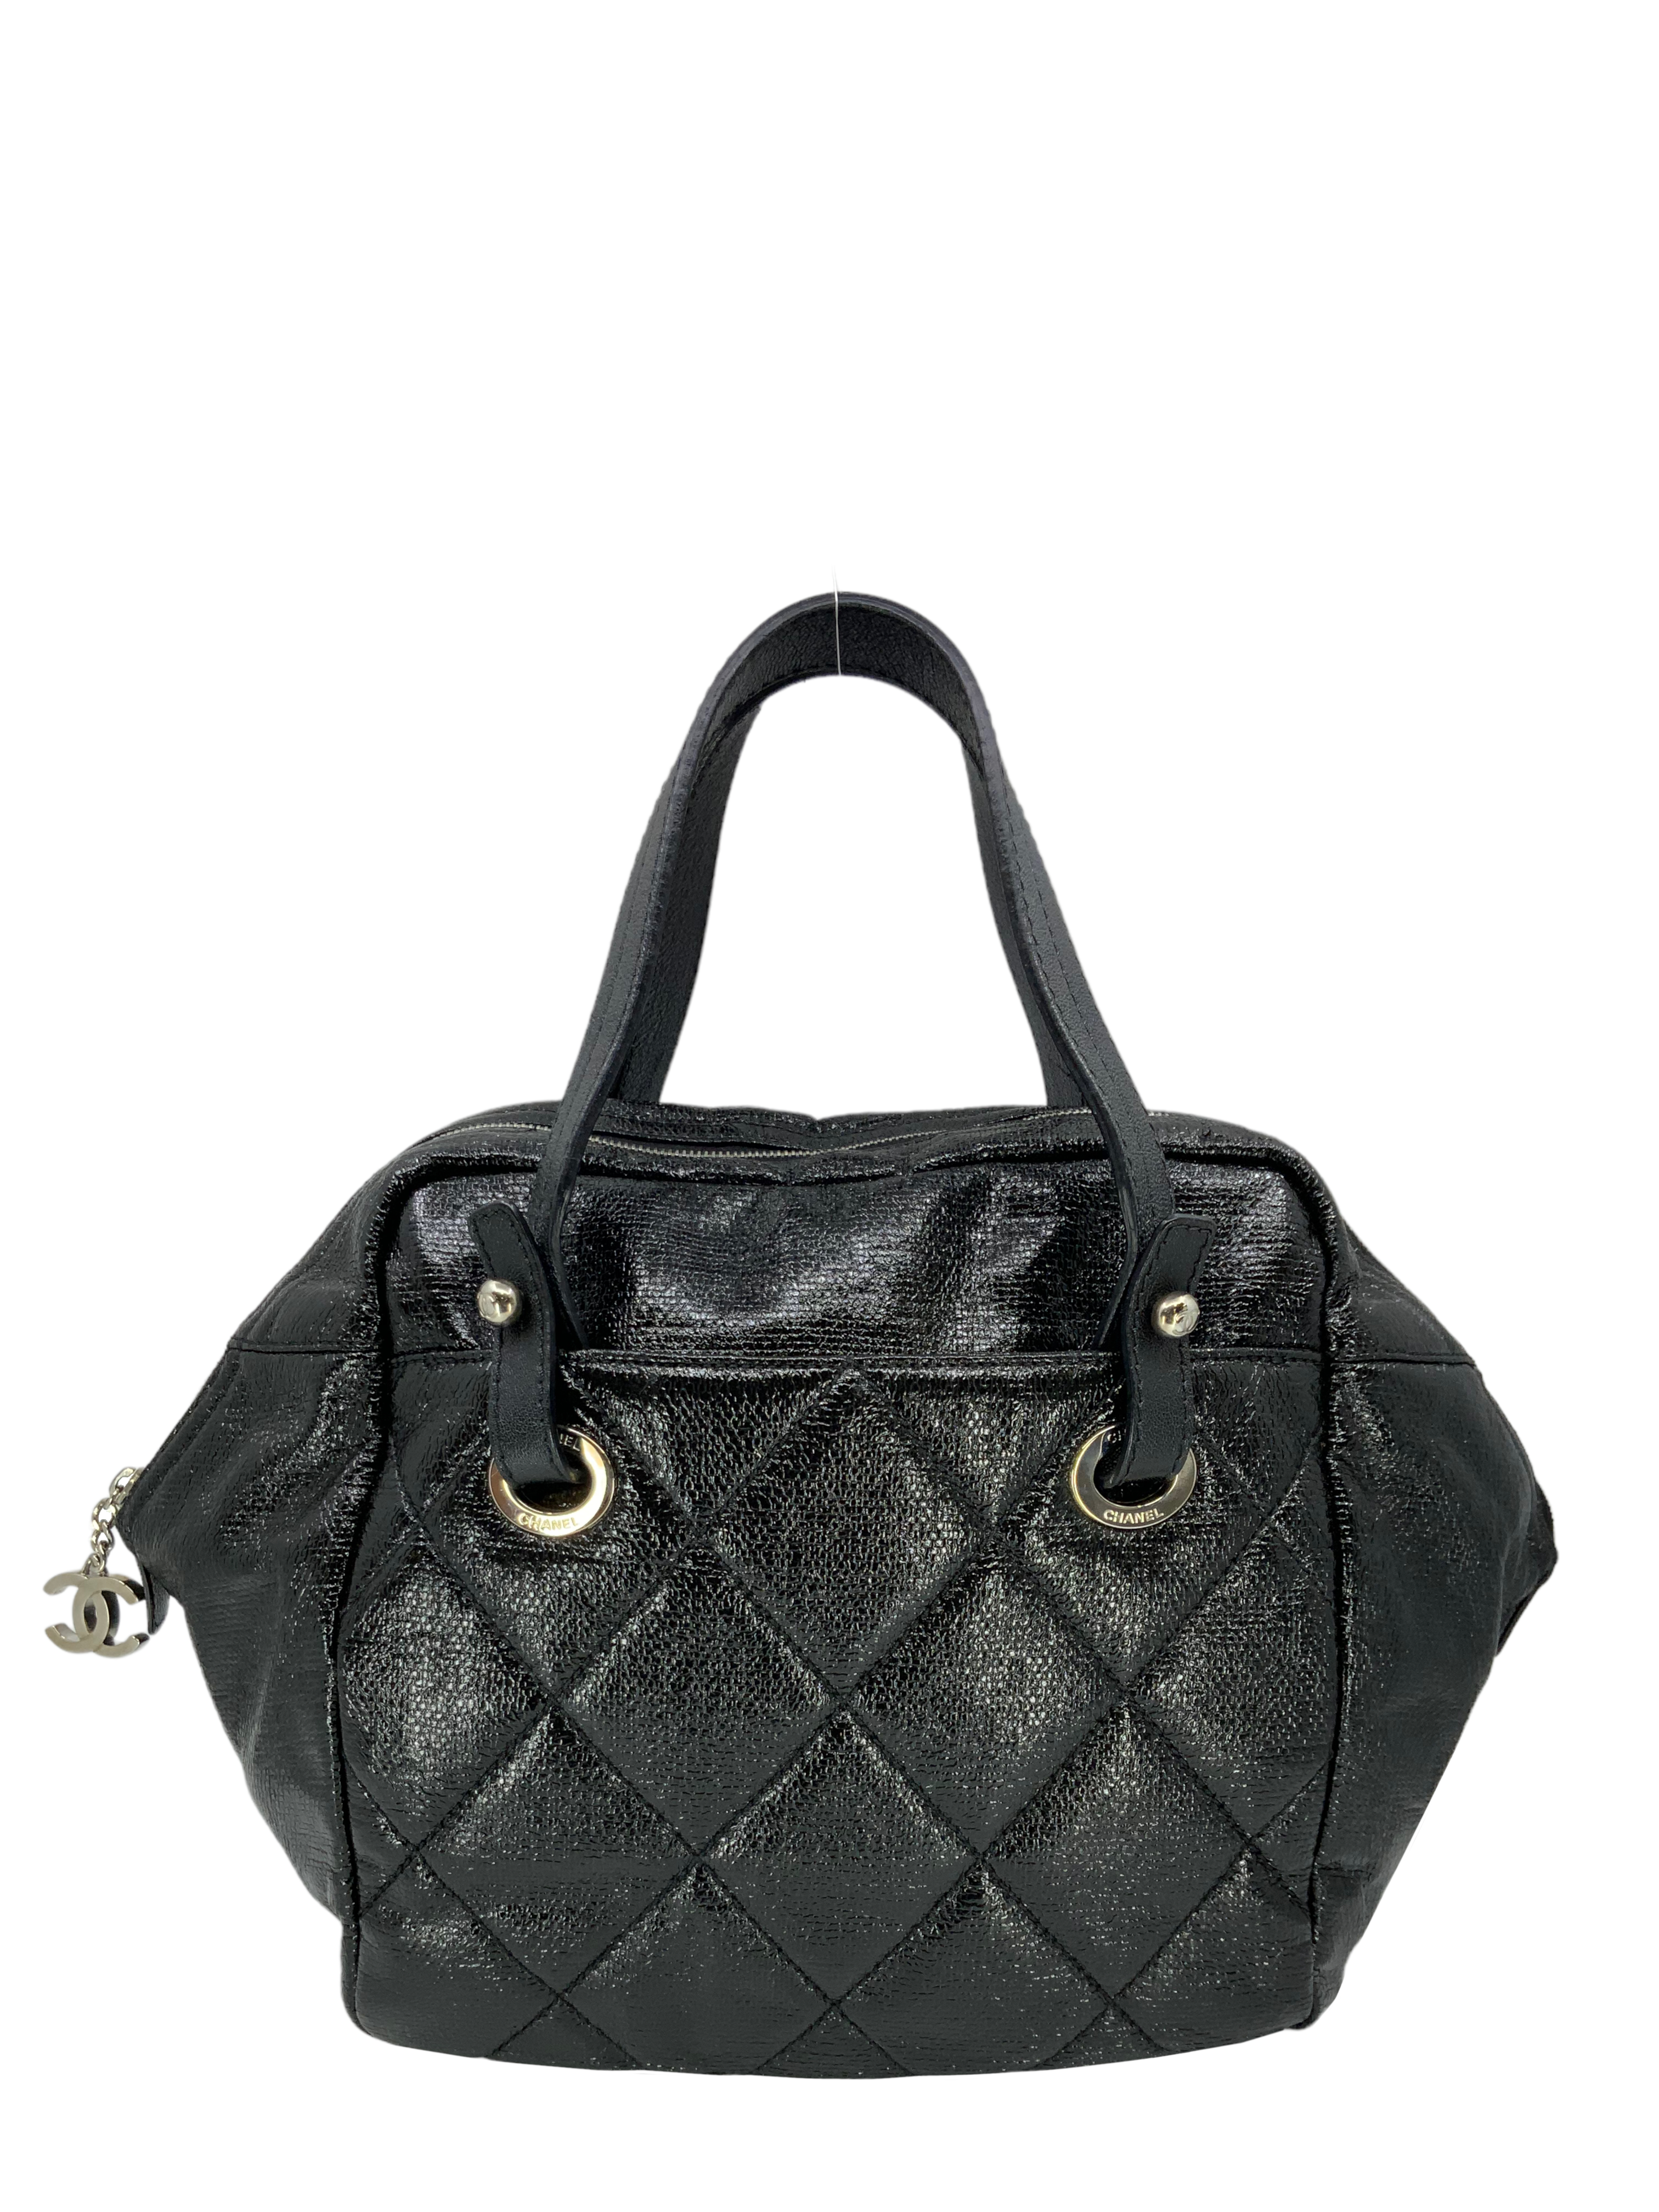 CHANEL Quilted Coated Leather Large Bowling Bag